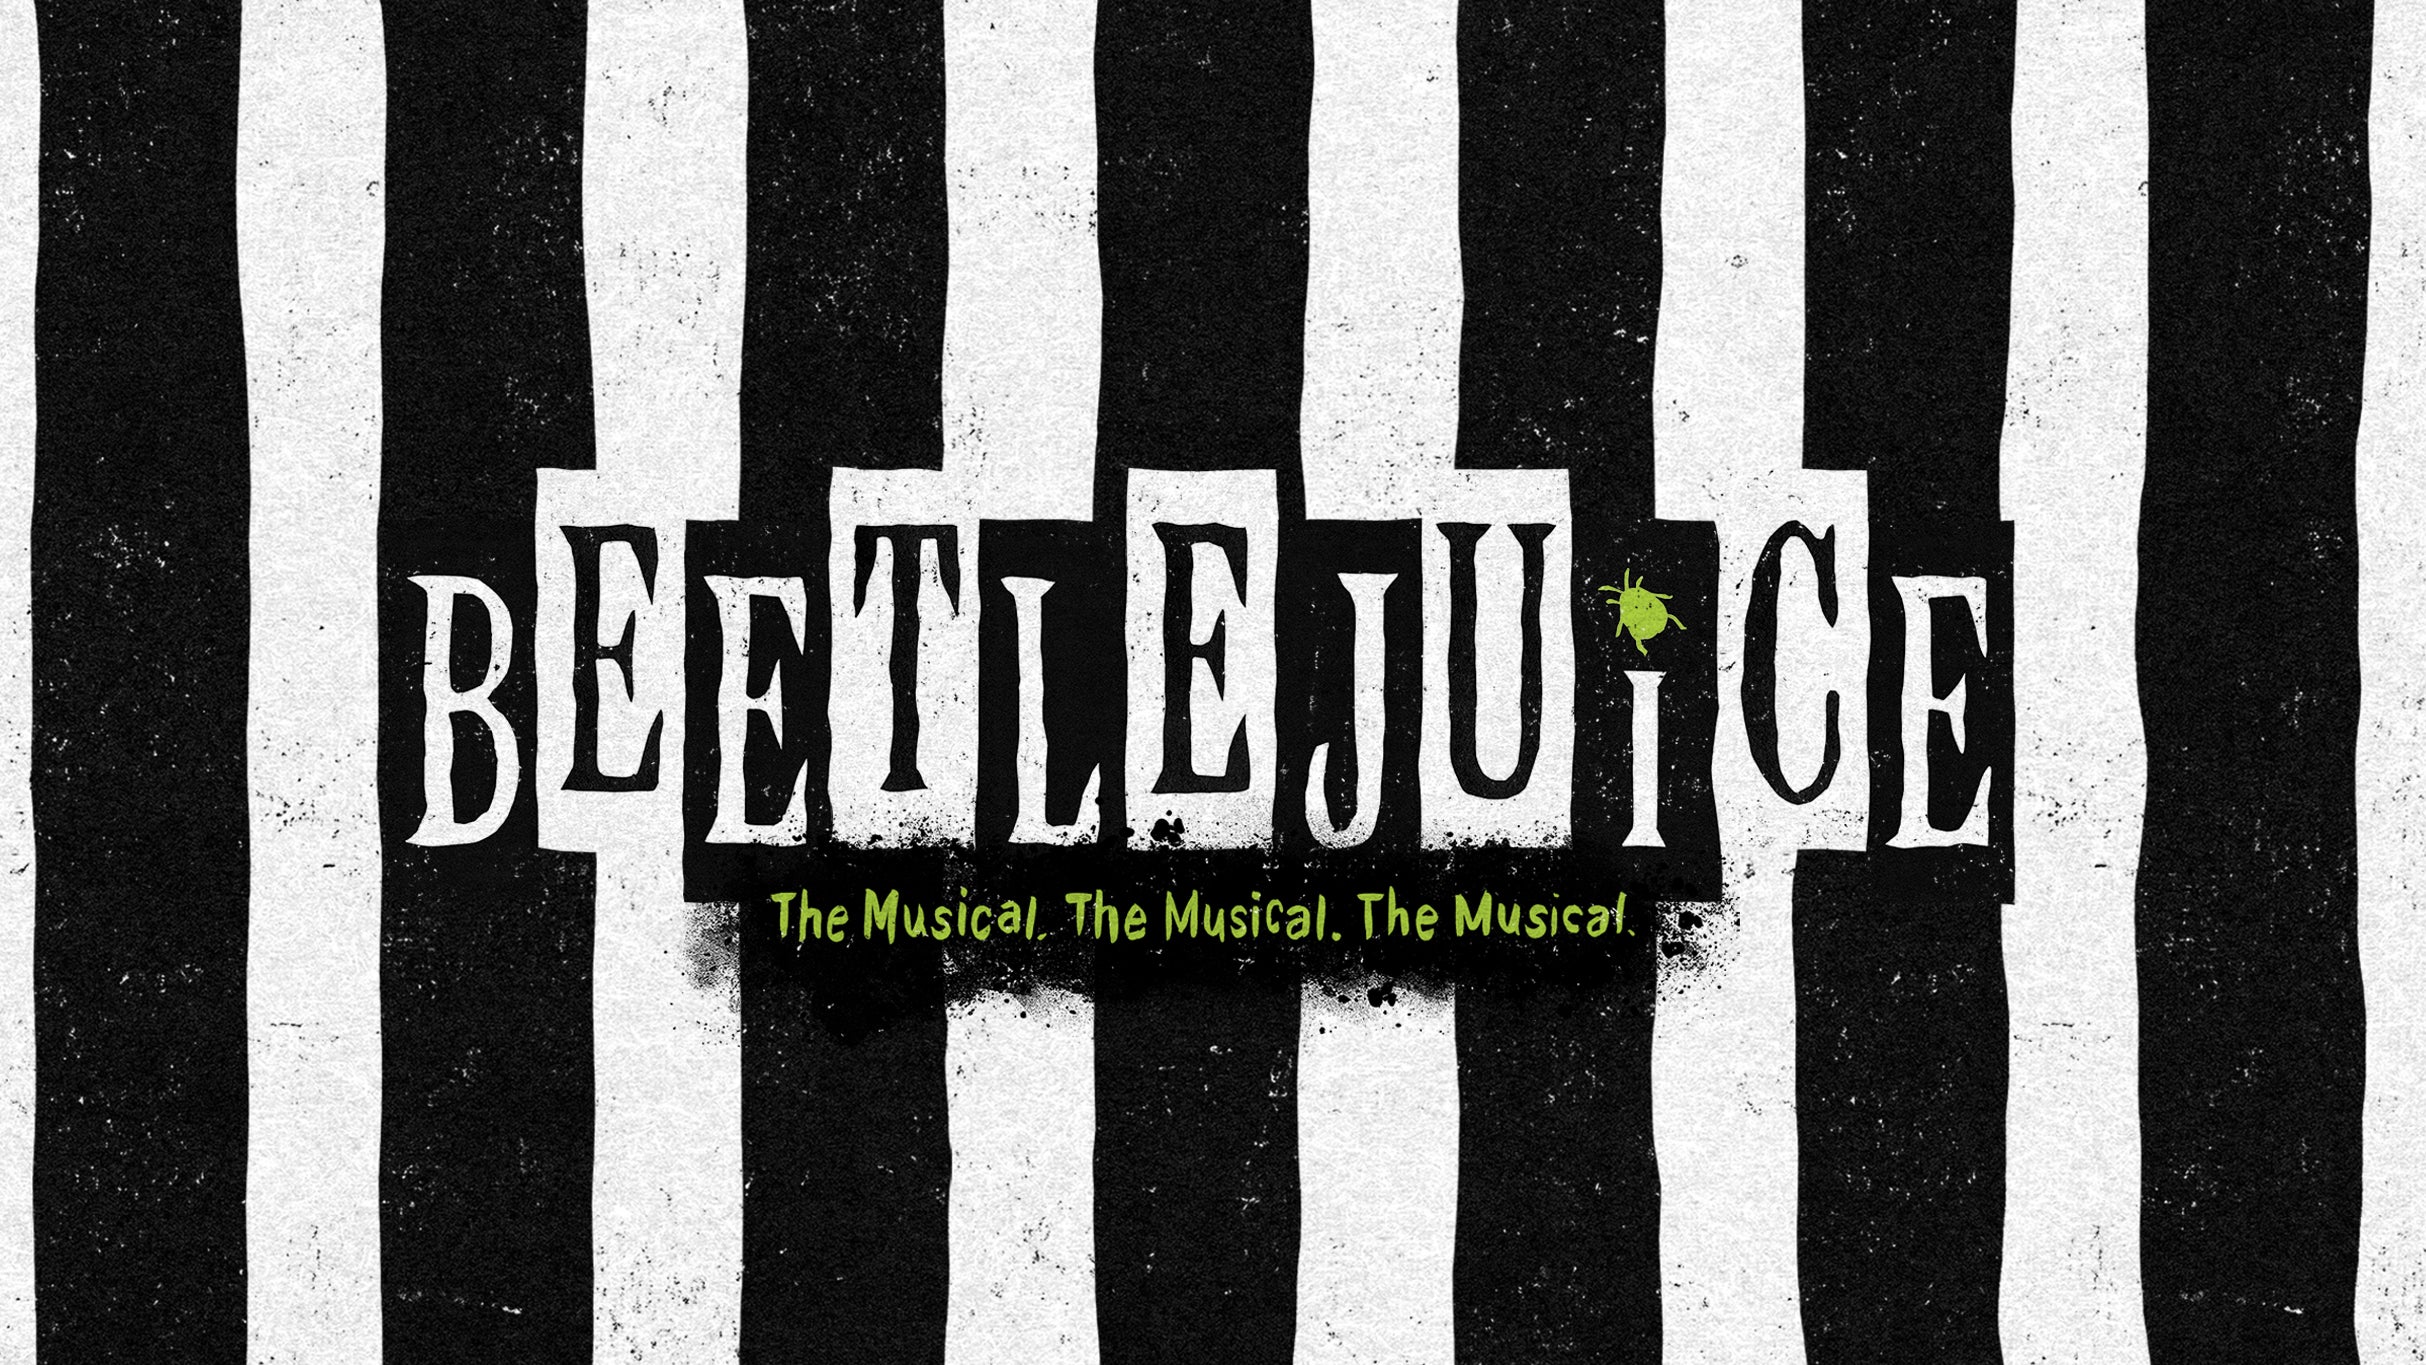 members only presale code for Beetlejuice (Touring) presale tickets in Louisville at Whitney Hall